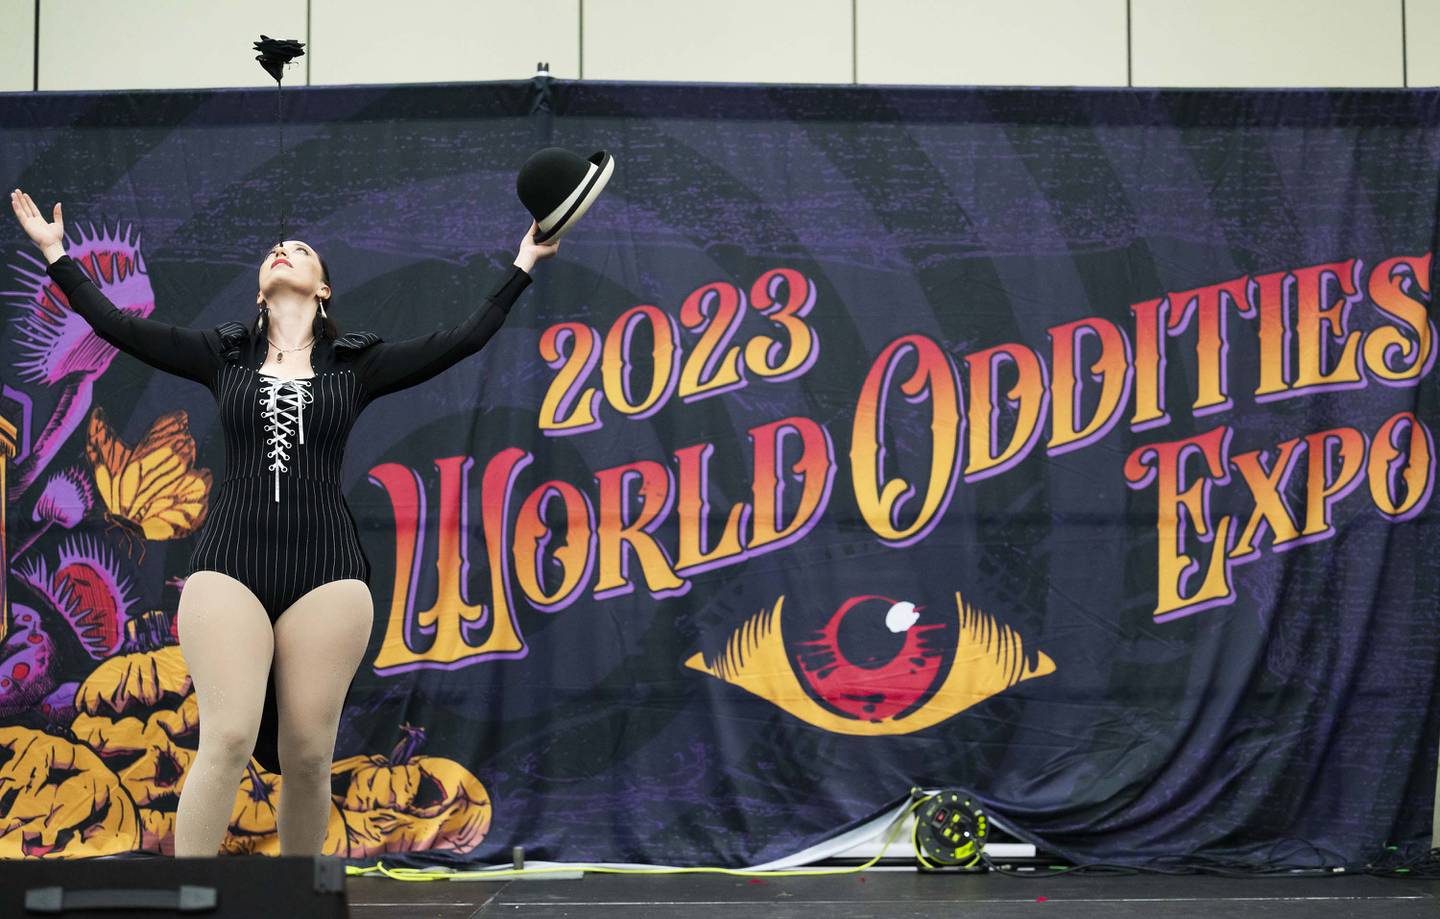 Kathryn Carr performs on stage during the 2023 World Oddities Expo at the Baltimore Convention Center in Baltimore, MD on October 07, 2023